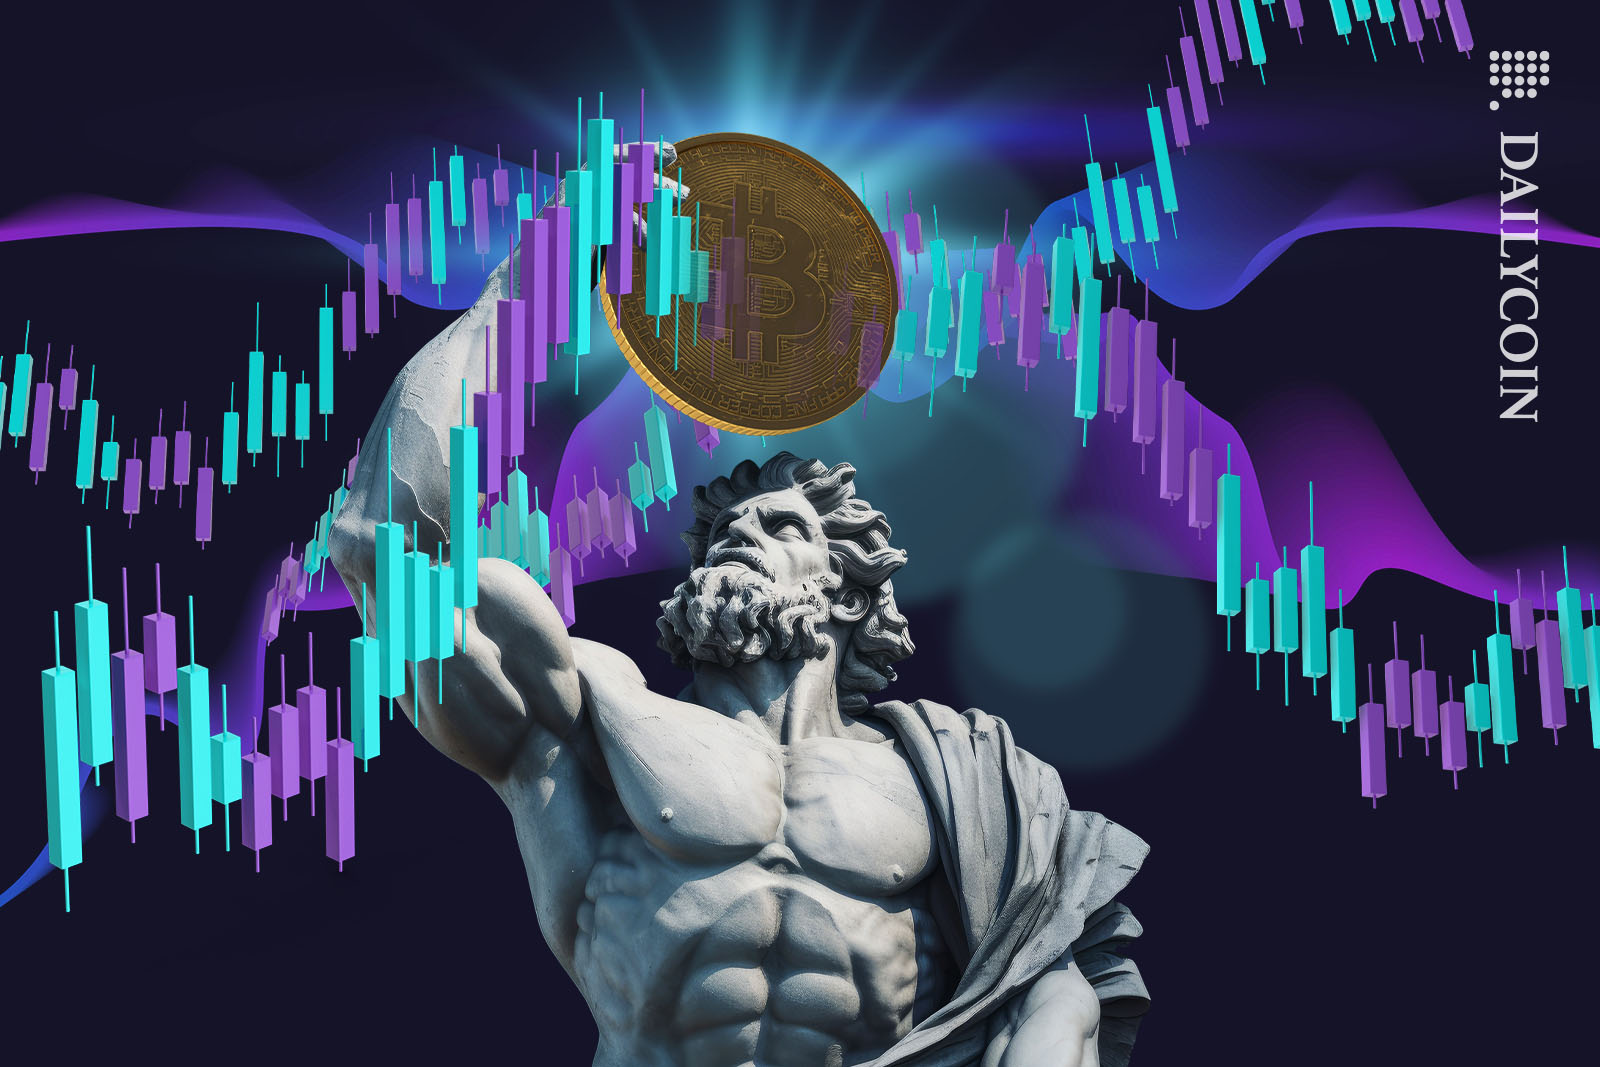 Athlas statue holding up a Bitcoin against lots of random charts.